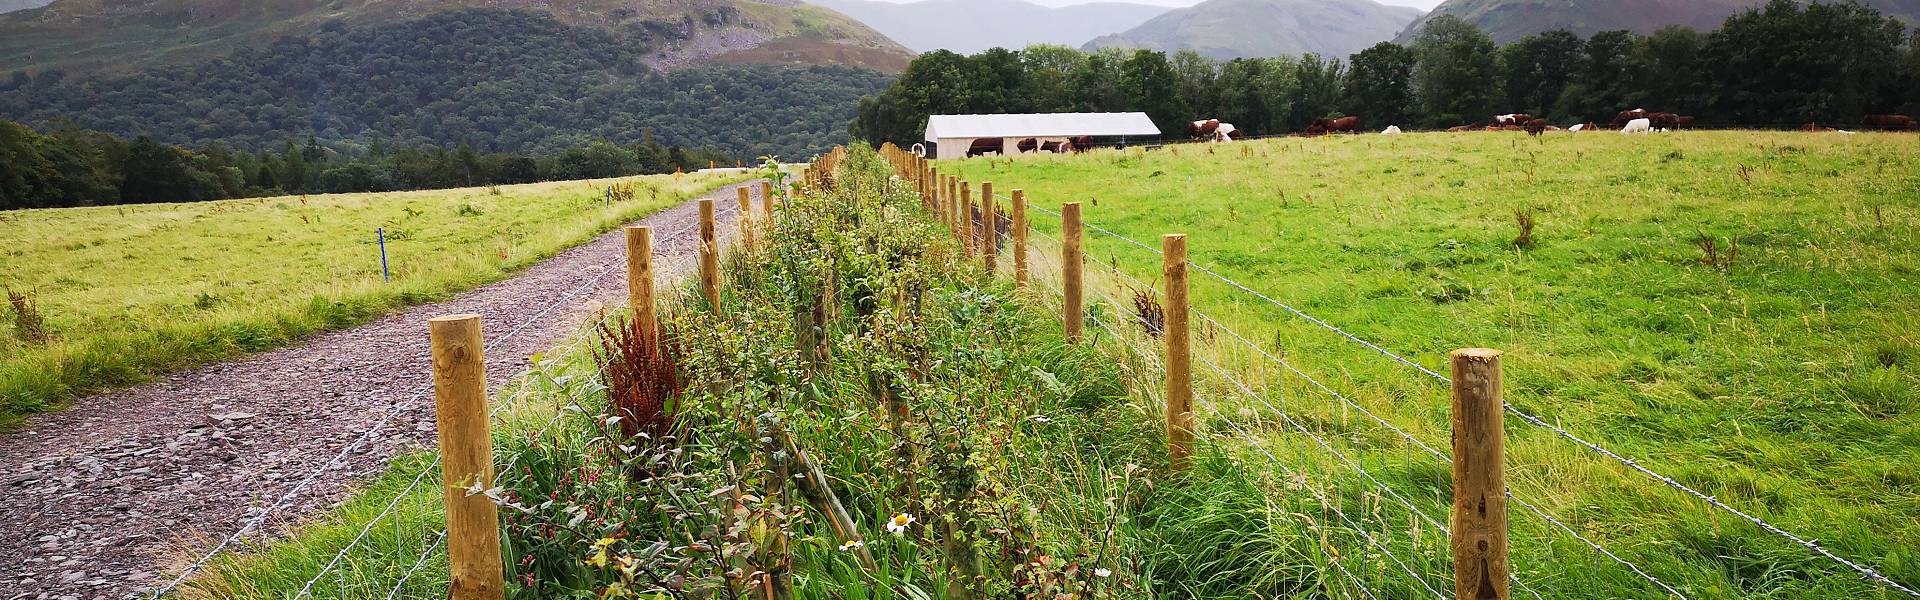 New hedgerows at Gowbarrow Farm Ullswater, with cows grazing in the background and woods in the background